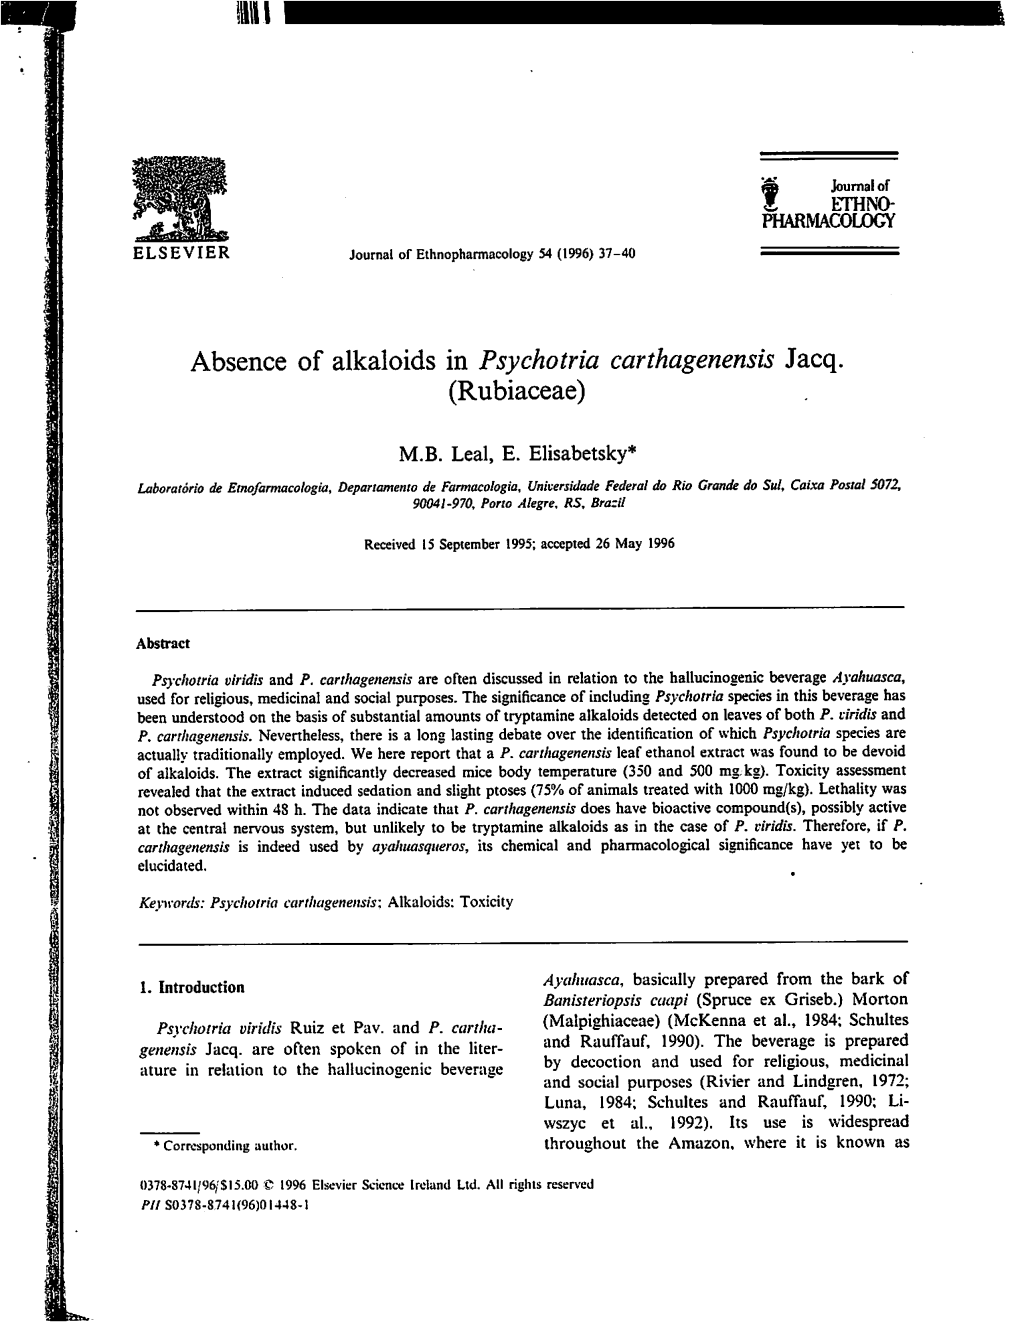 Absence of Alkaloids in Psychotria Carthagenensis Jacq. (Rubiaceae)